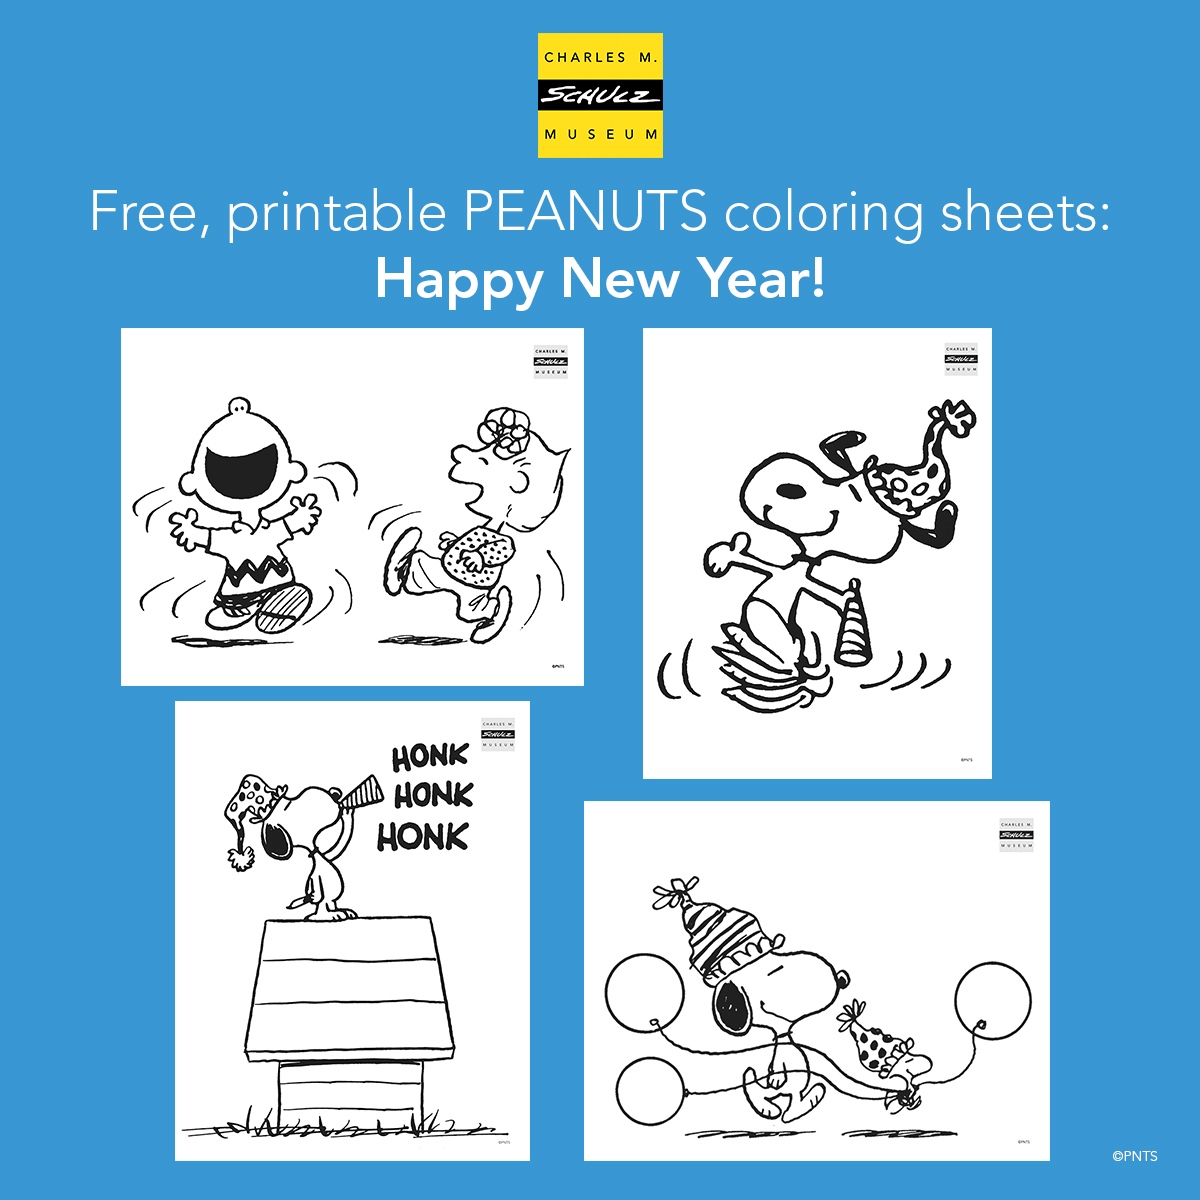 Charles m schulz museum on x ððð look forward to the new year and color in some free printable peanuts coloring pages ð download these designs and more at httpstcobwkqgpcpe